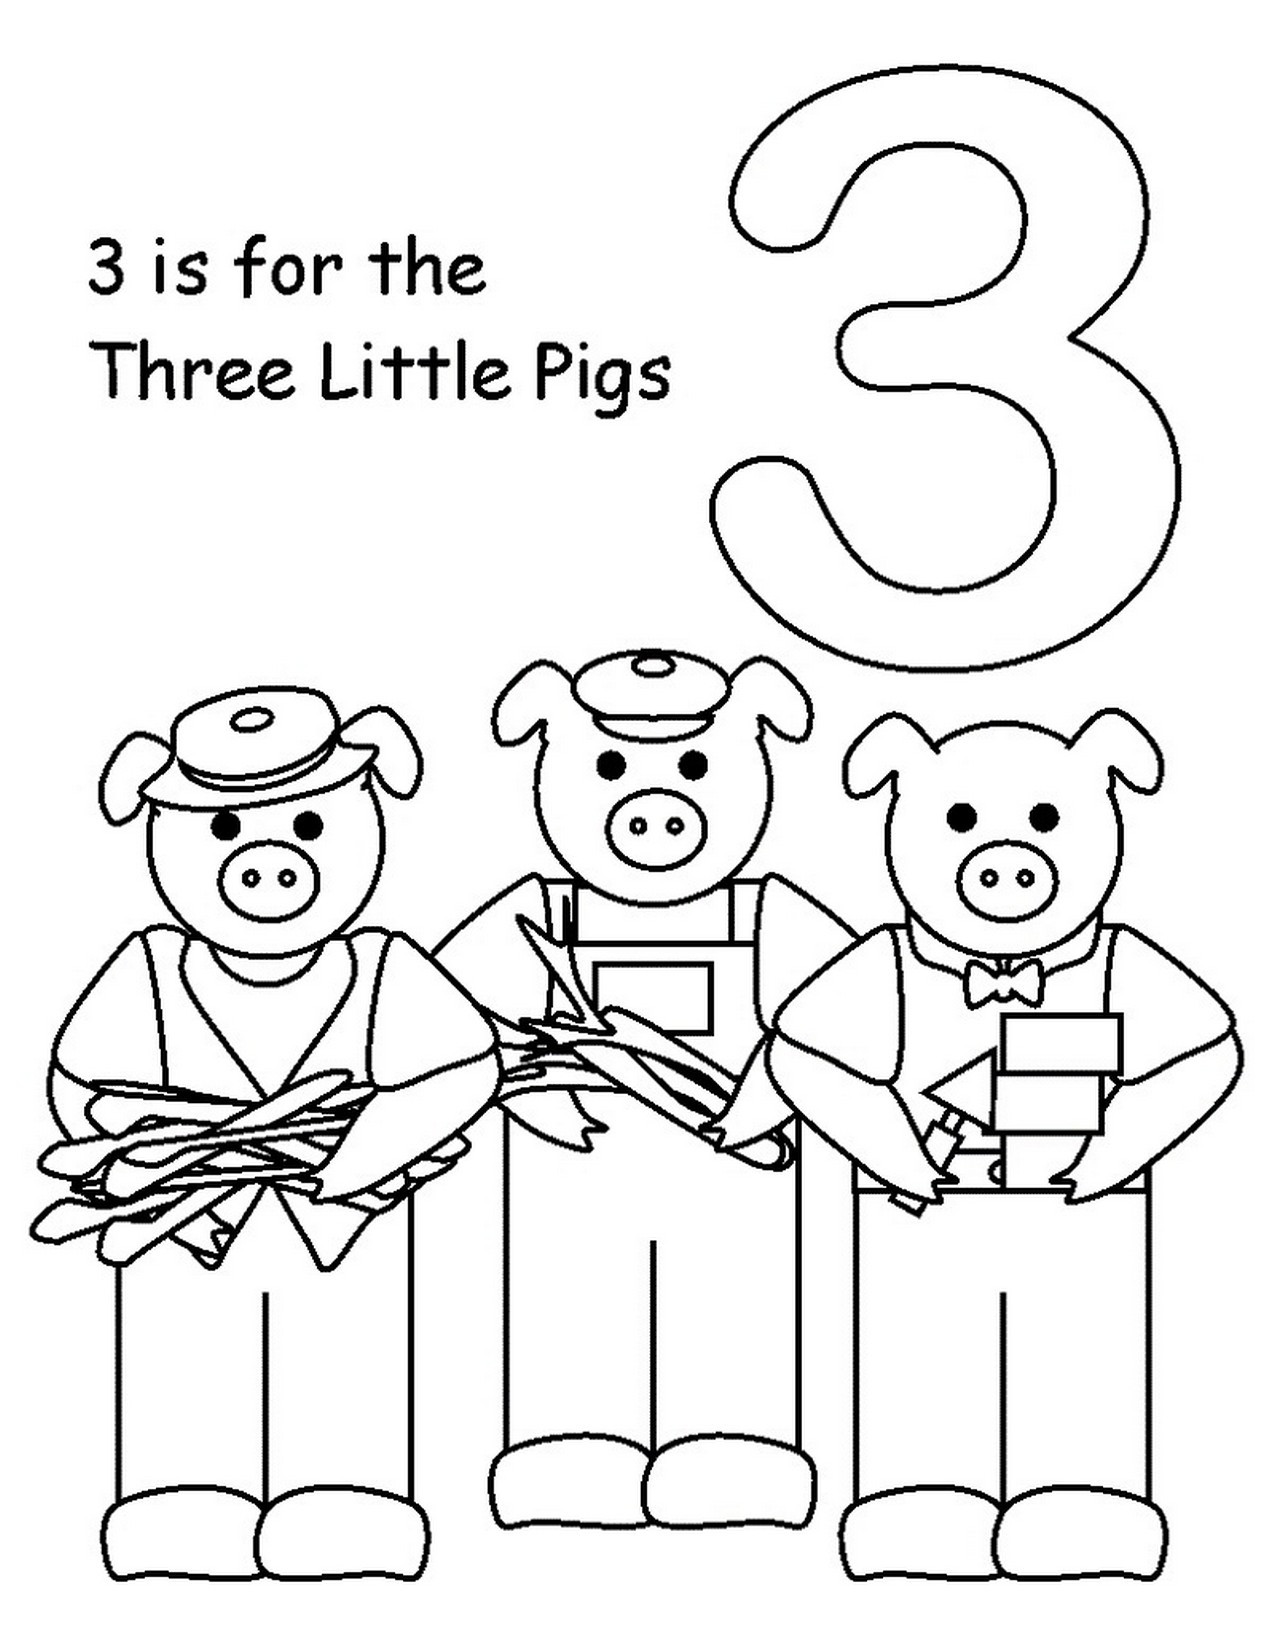 Preschool Coloring Sheets For The 3 Little Pigs Wolf Mask
 Three Little Pigs Coloring Pages for Preschool